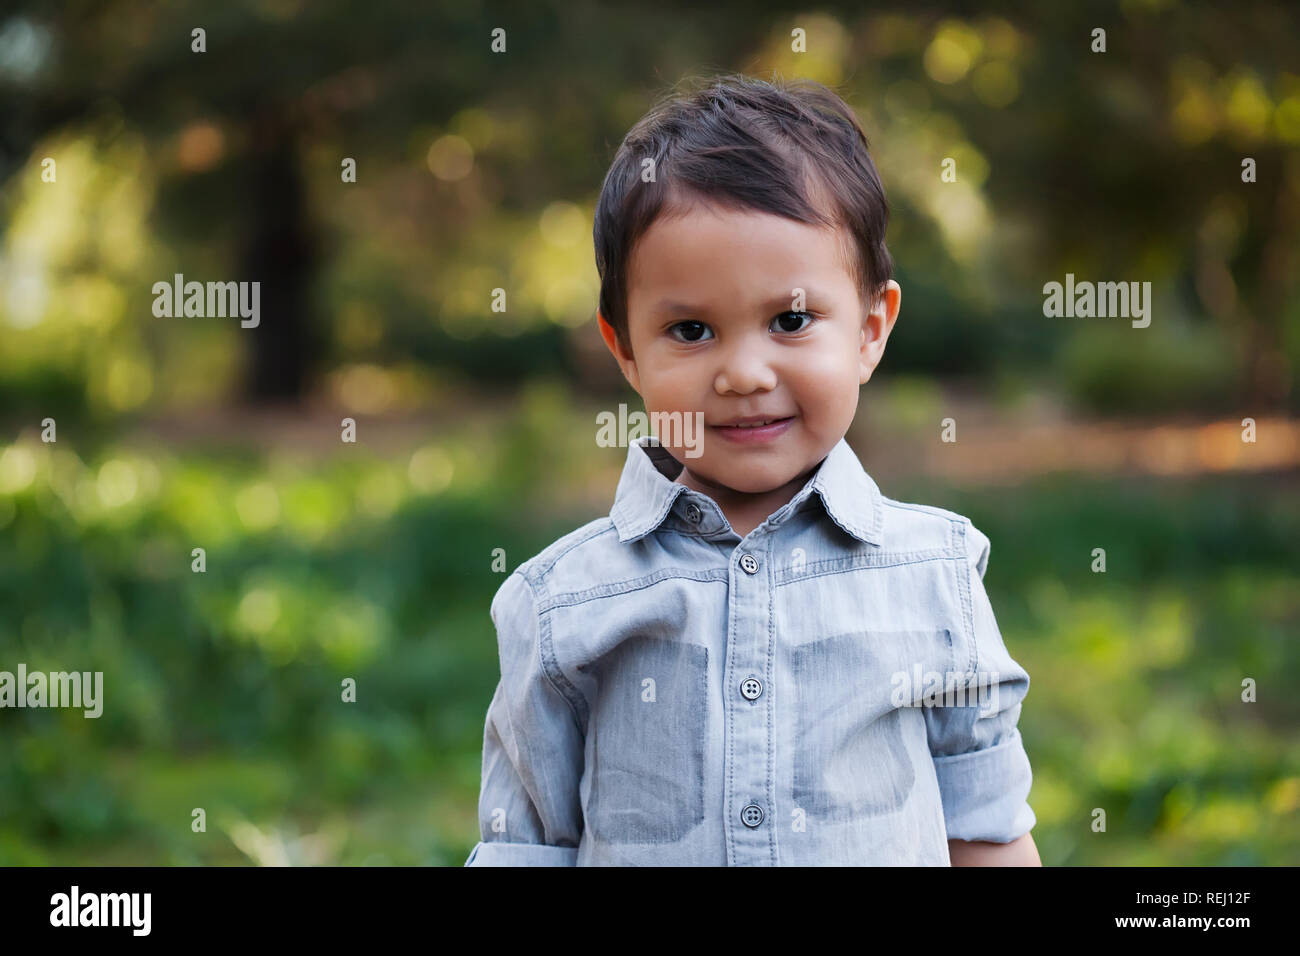 A cute mexican boy standing in a green wooded field, with gentle smile on his face and wearing a long sleeve shirt. Stock Photo